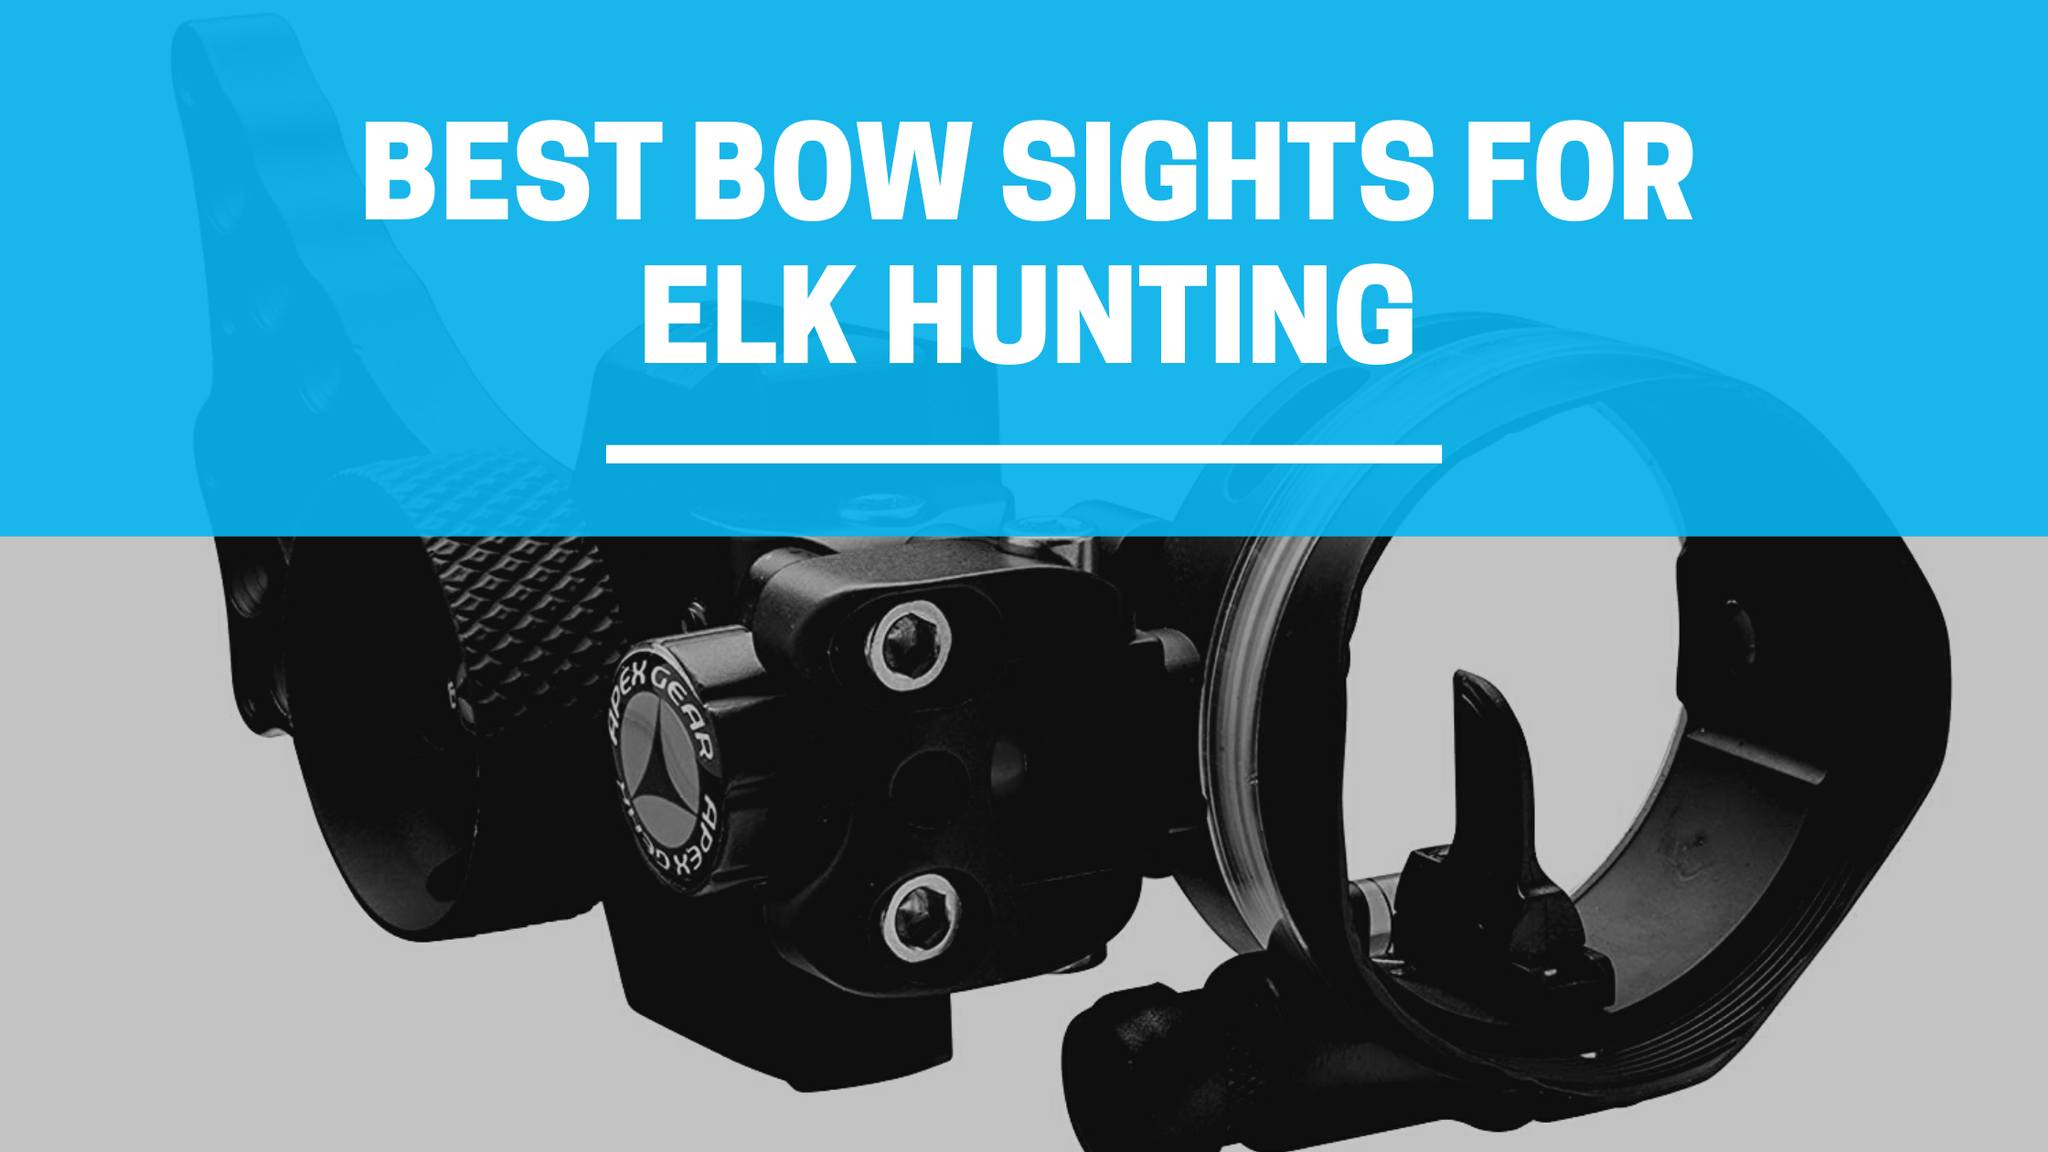 Get The Best Bow Sight For Elk Hunting With Our Guide